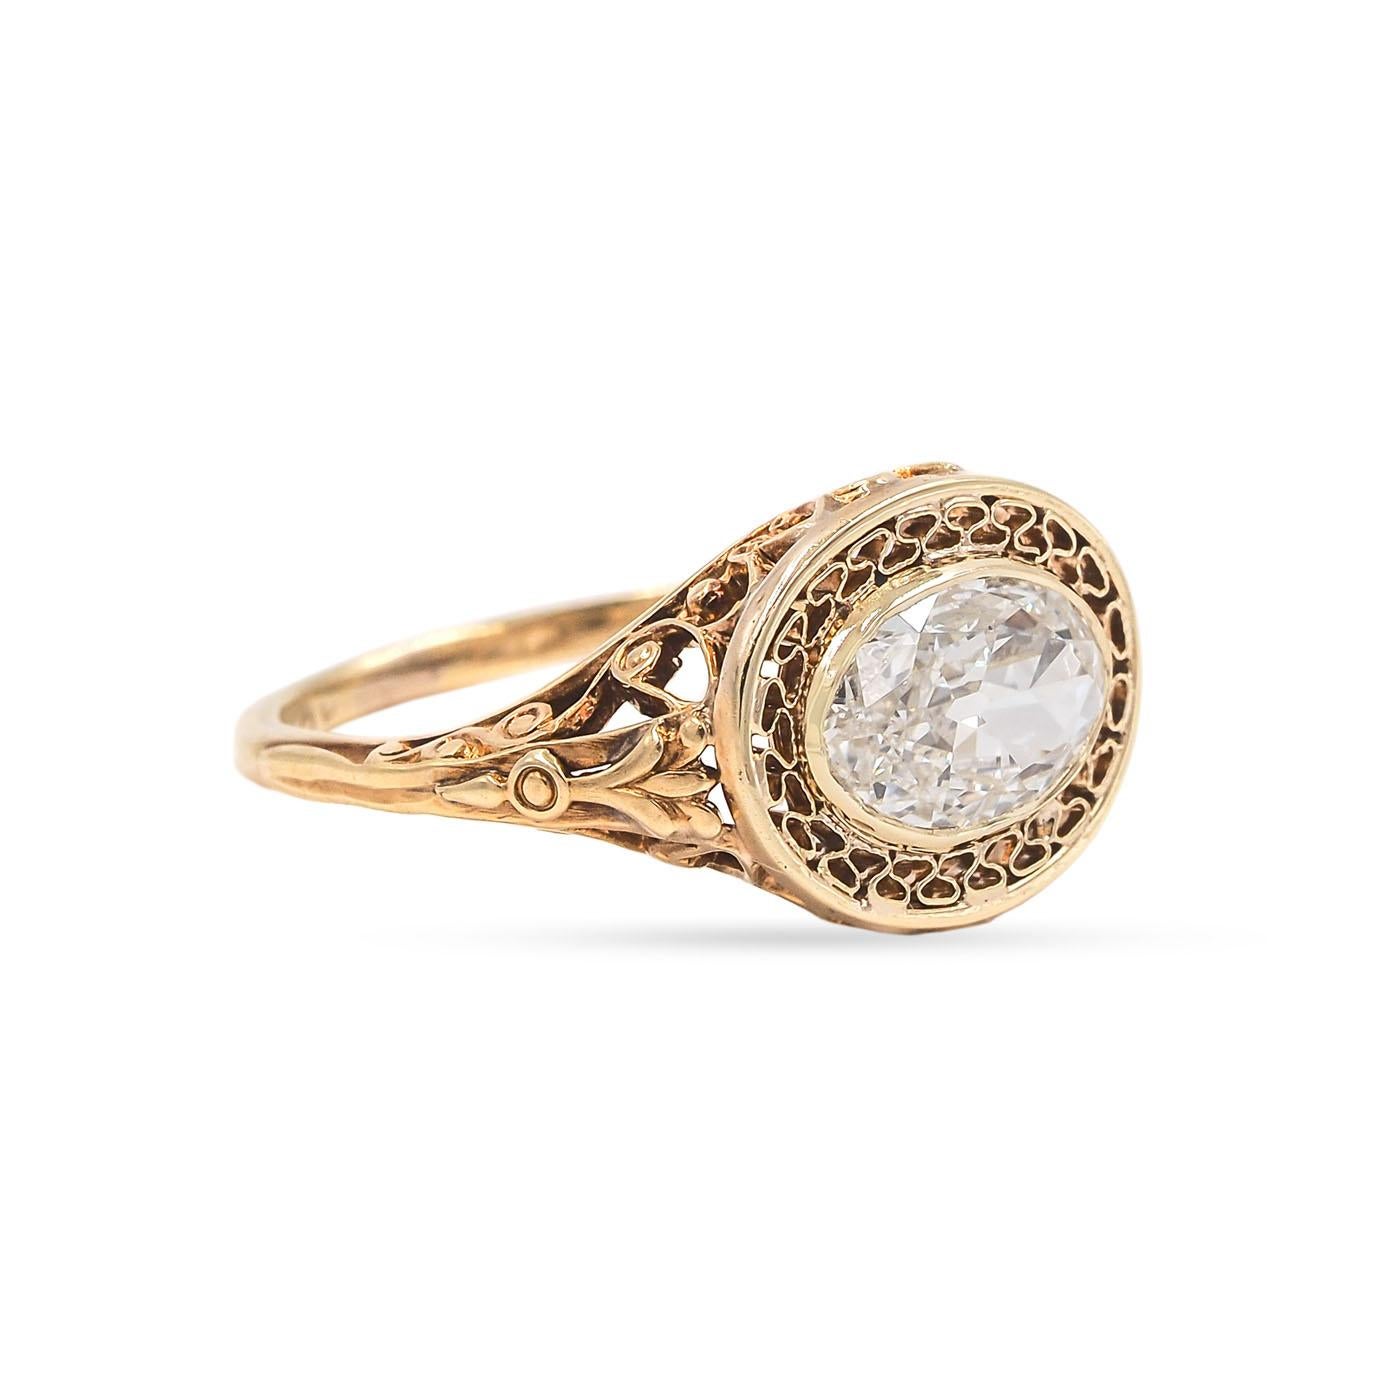  Early Edwardian era 1.03 Carat Antique Oval Cut Diamond Engagement Ring composed of 14k yellow gold. The 1.03 carat Oval Cut diamond is GIA certified G color/VVS2 clarity. In an oval East/West (horizontal) setting, with ornate pierced cut-out